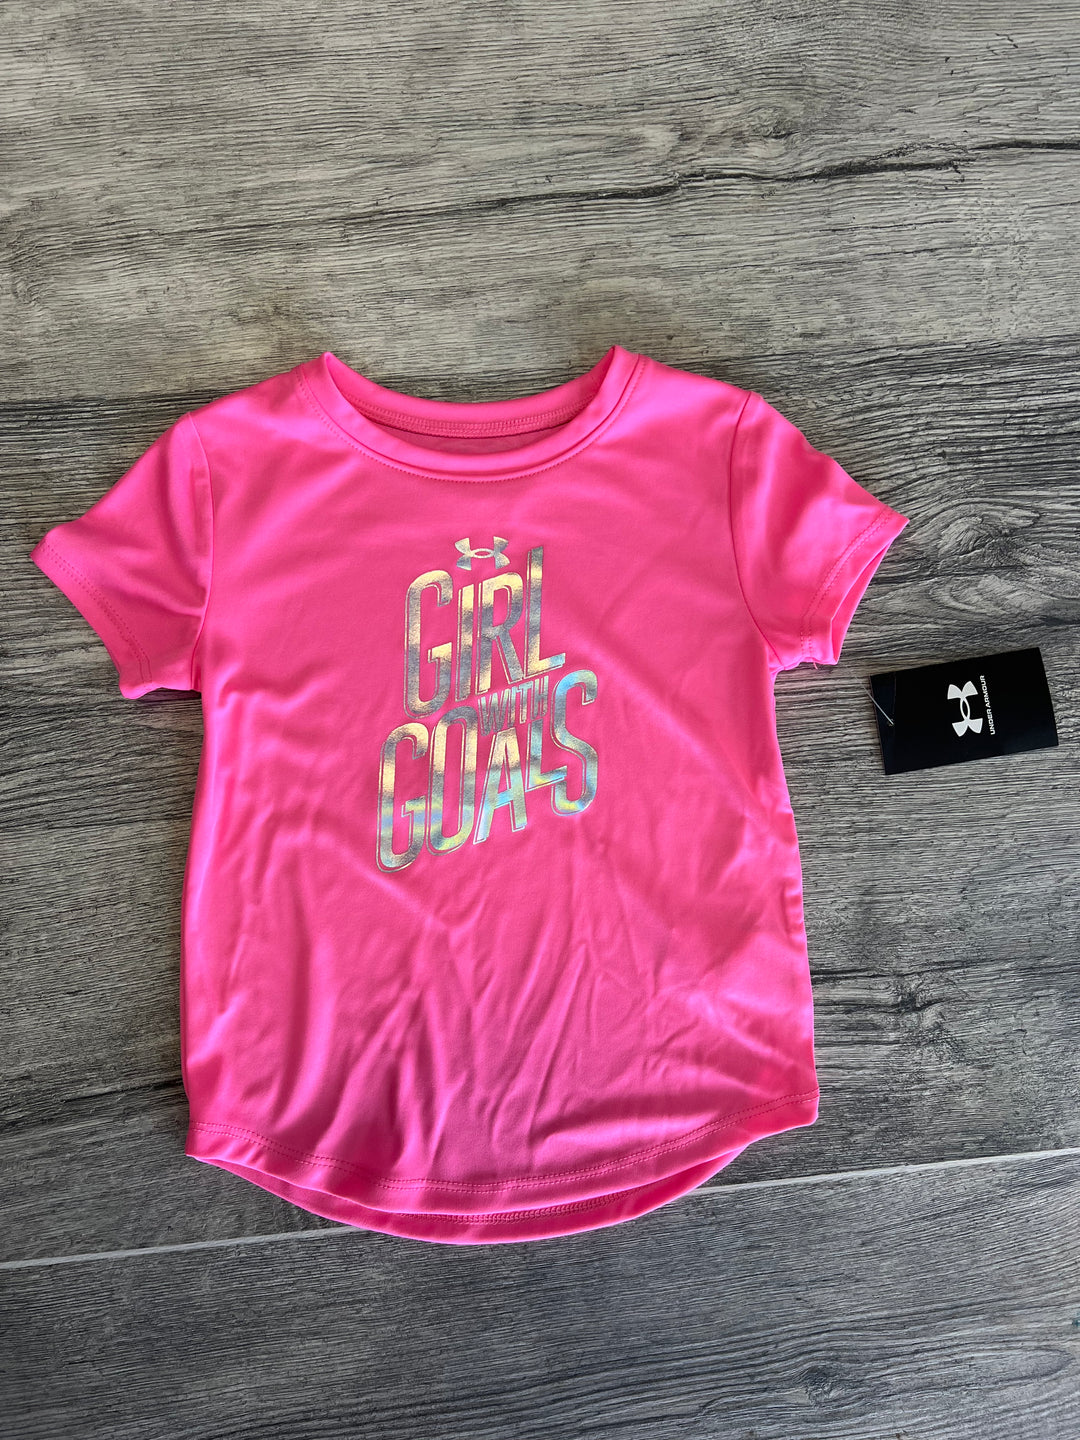 Girls with Goals Pink Tee